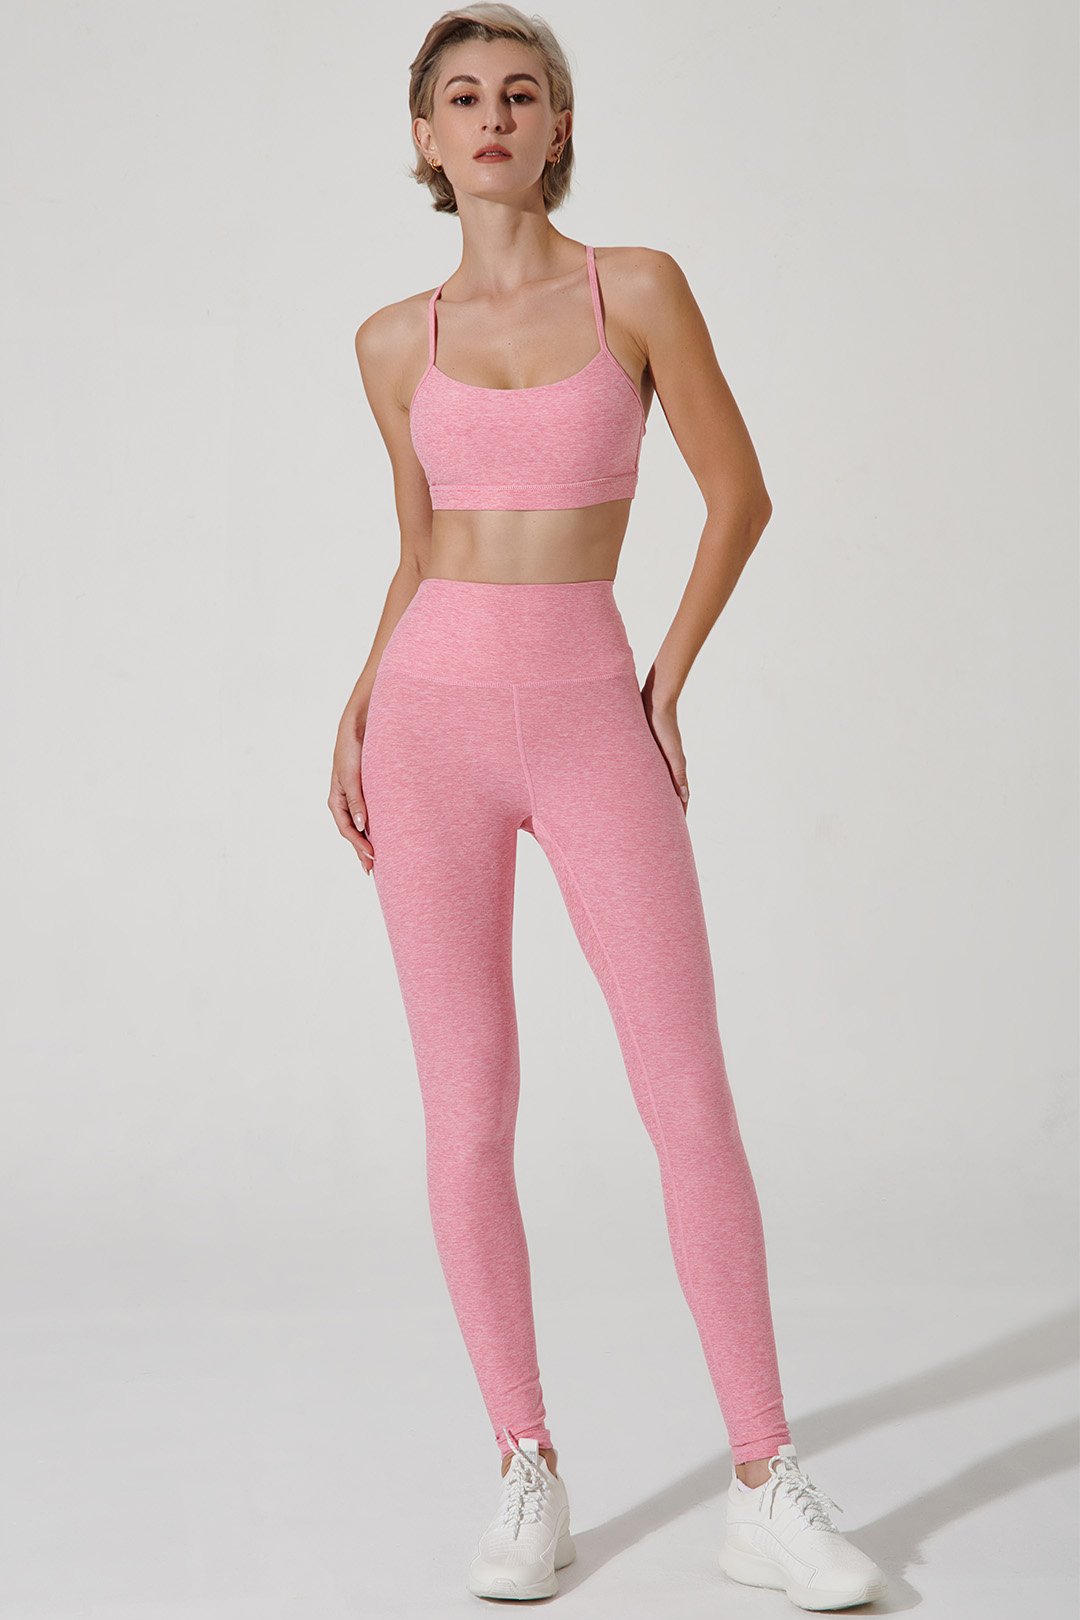 Cheri's women's leggings in peaches pink, a fashionable and comfortable choice for any occasion.